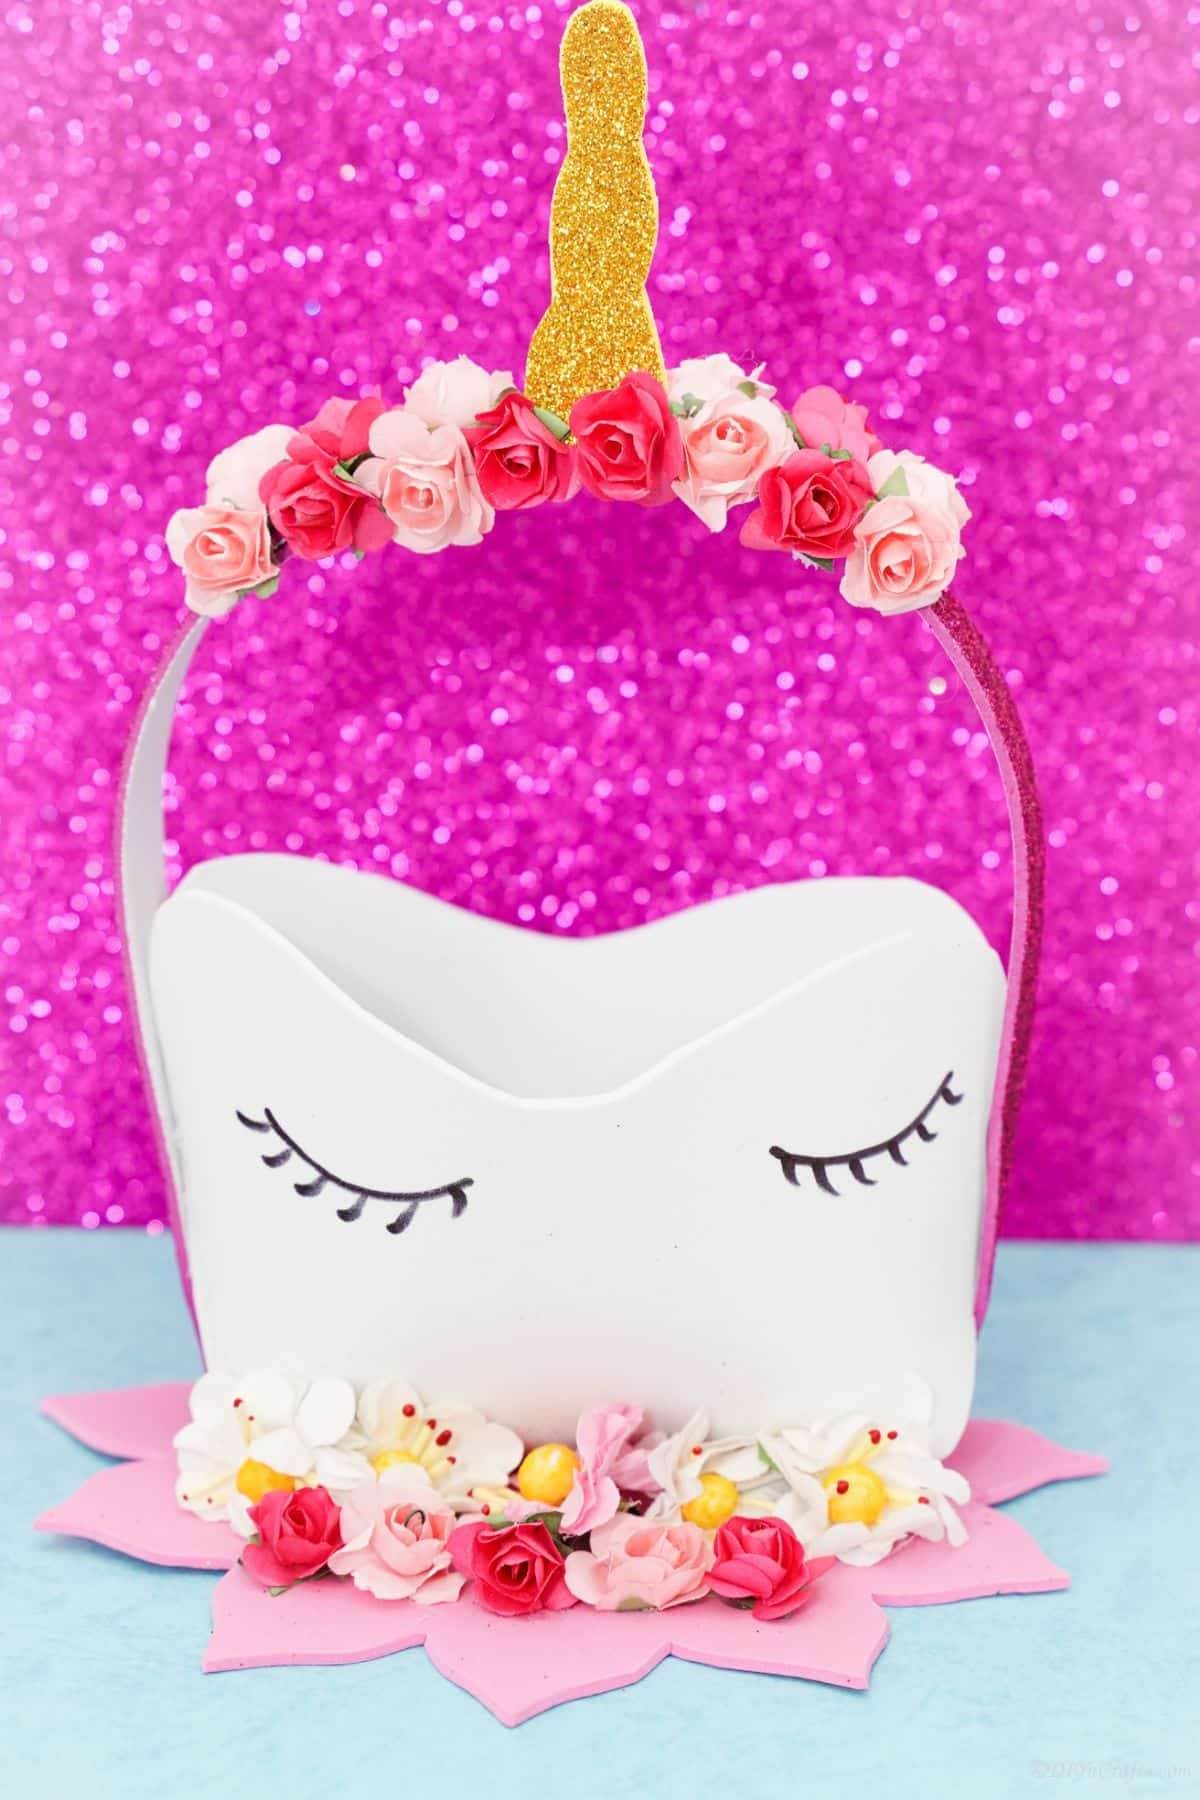 unicorn basket on blue table with pink background